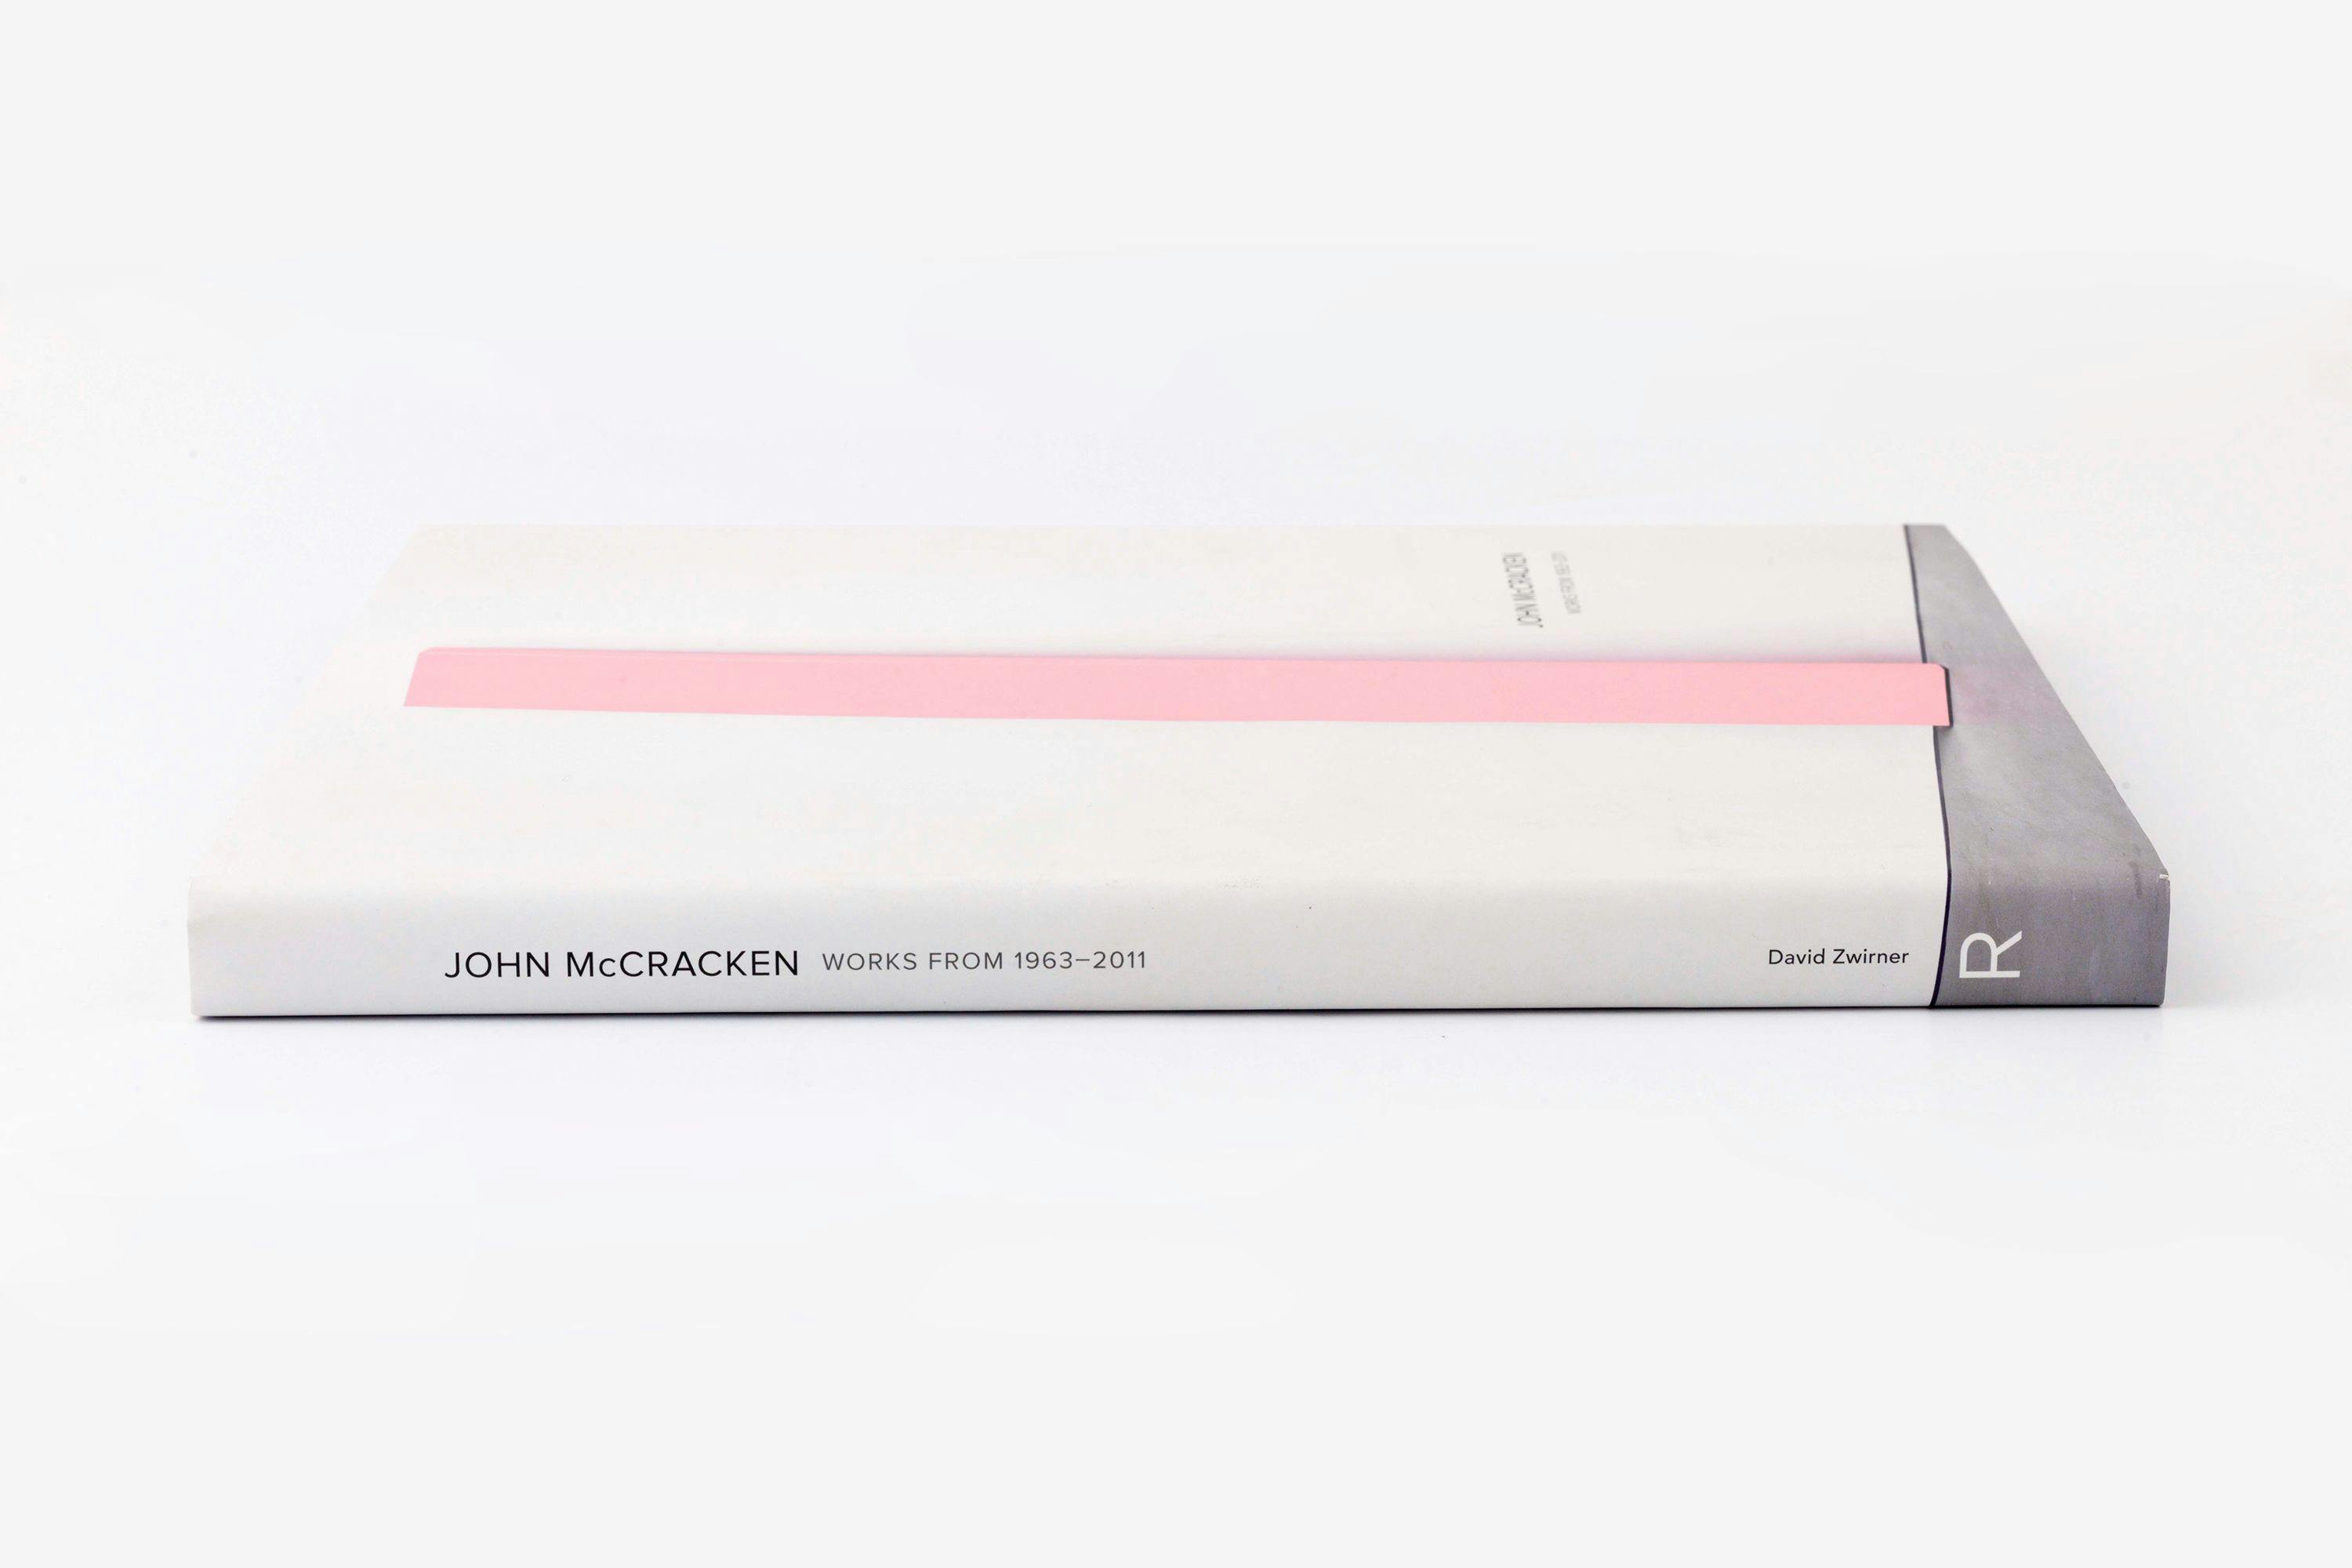 The cover of John McCracken: Works from 1963-2011, published by David Zwirner Books / Radius Books, 2014.